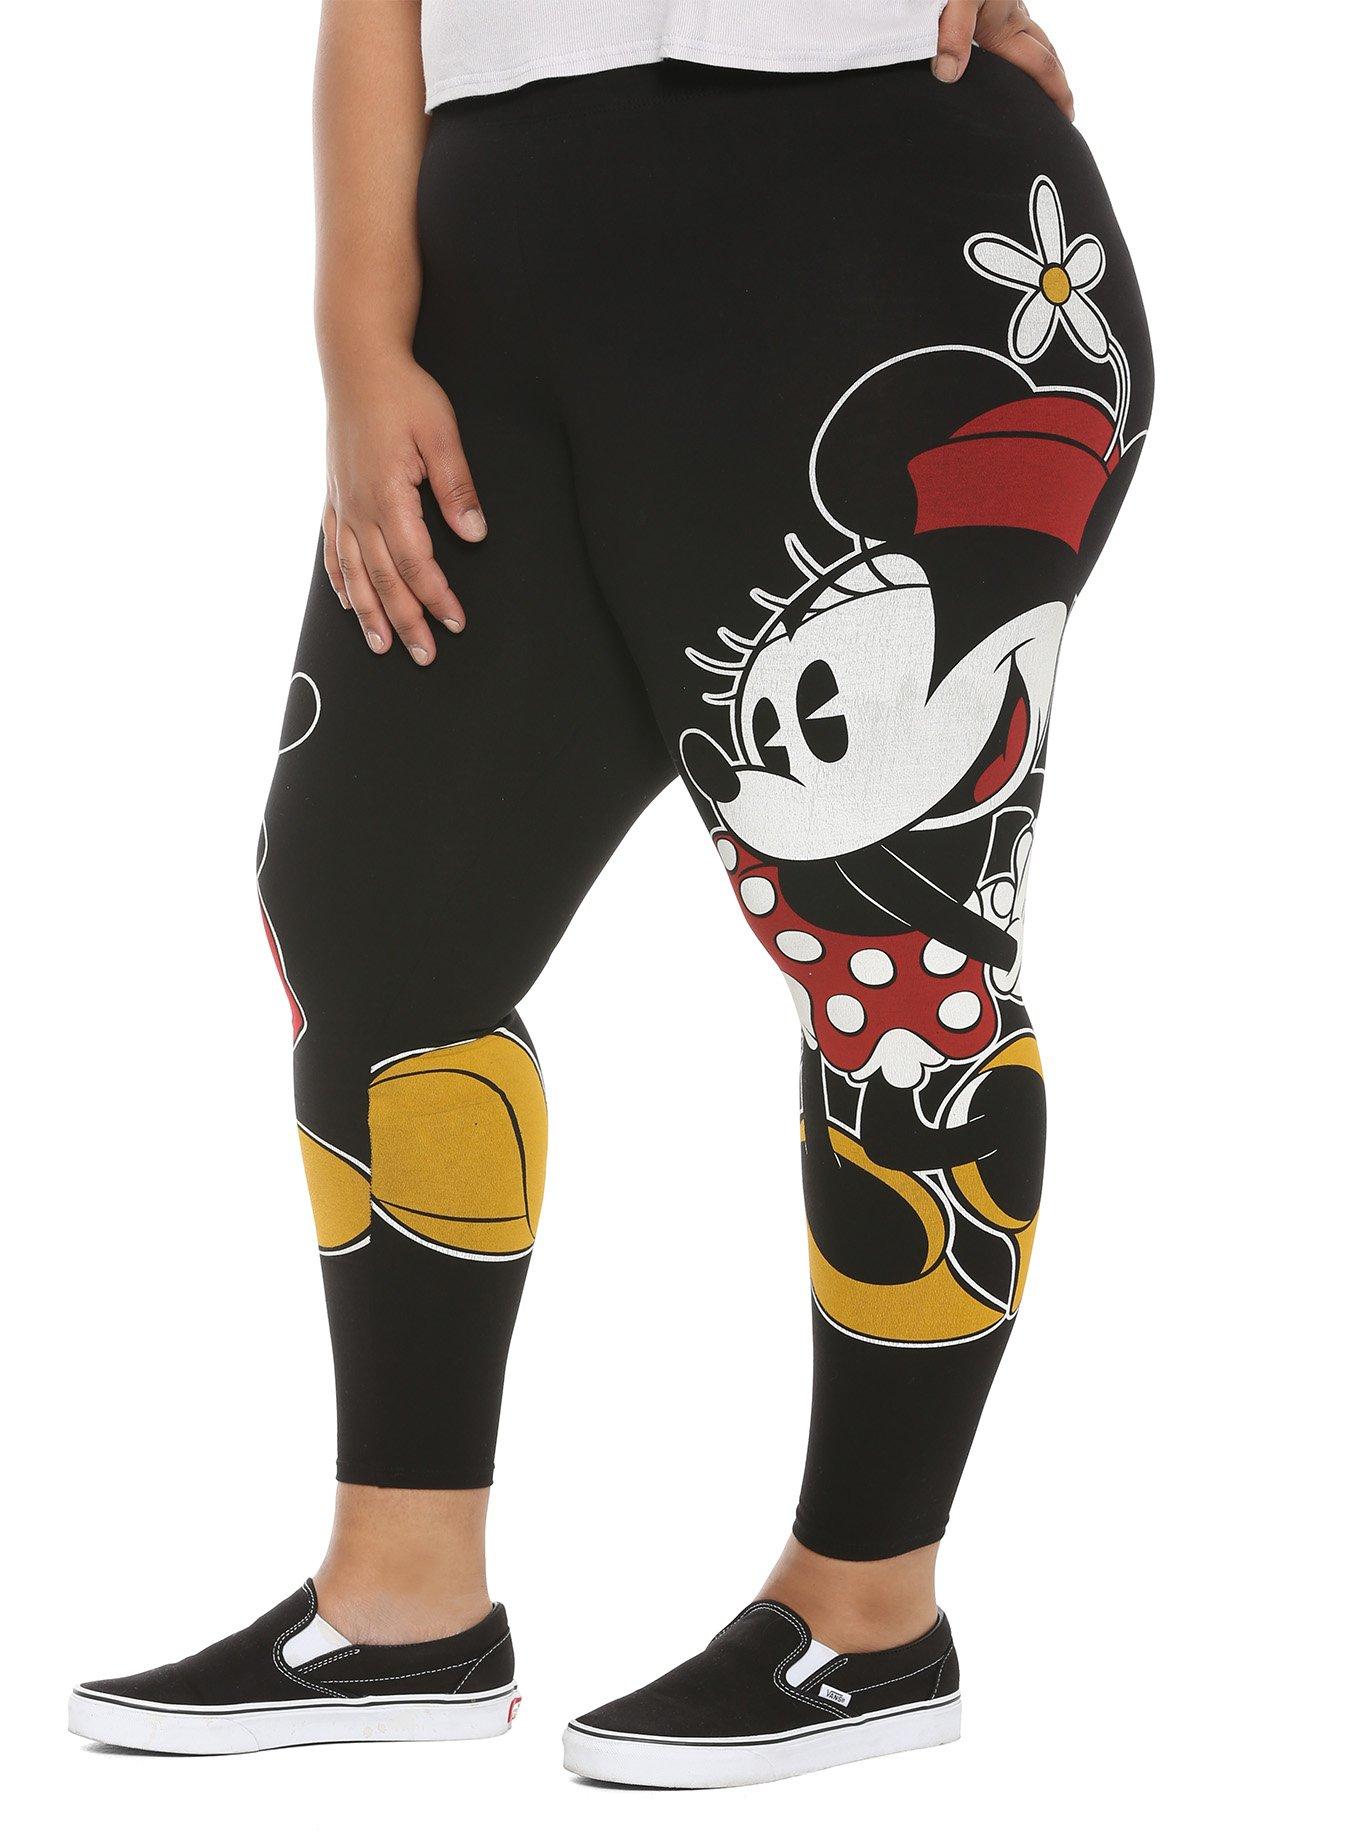 Mickey Mouse Leggings Styles, Prices - Trendyol